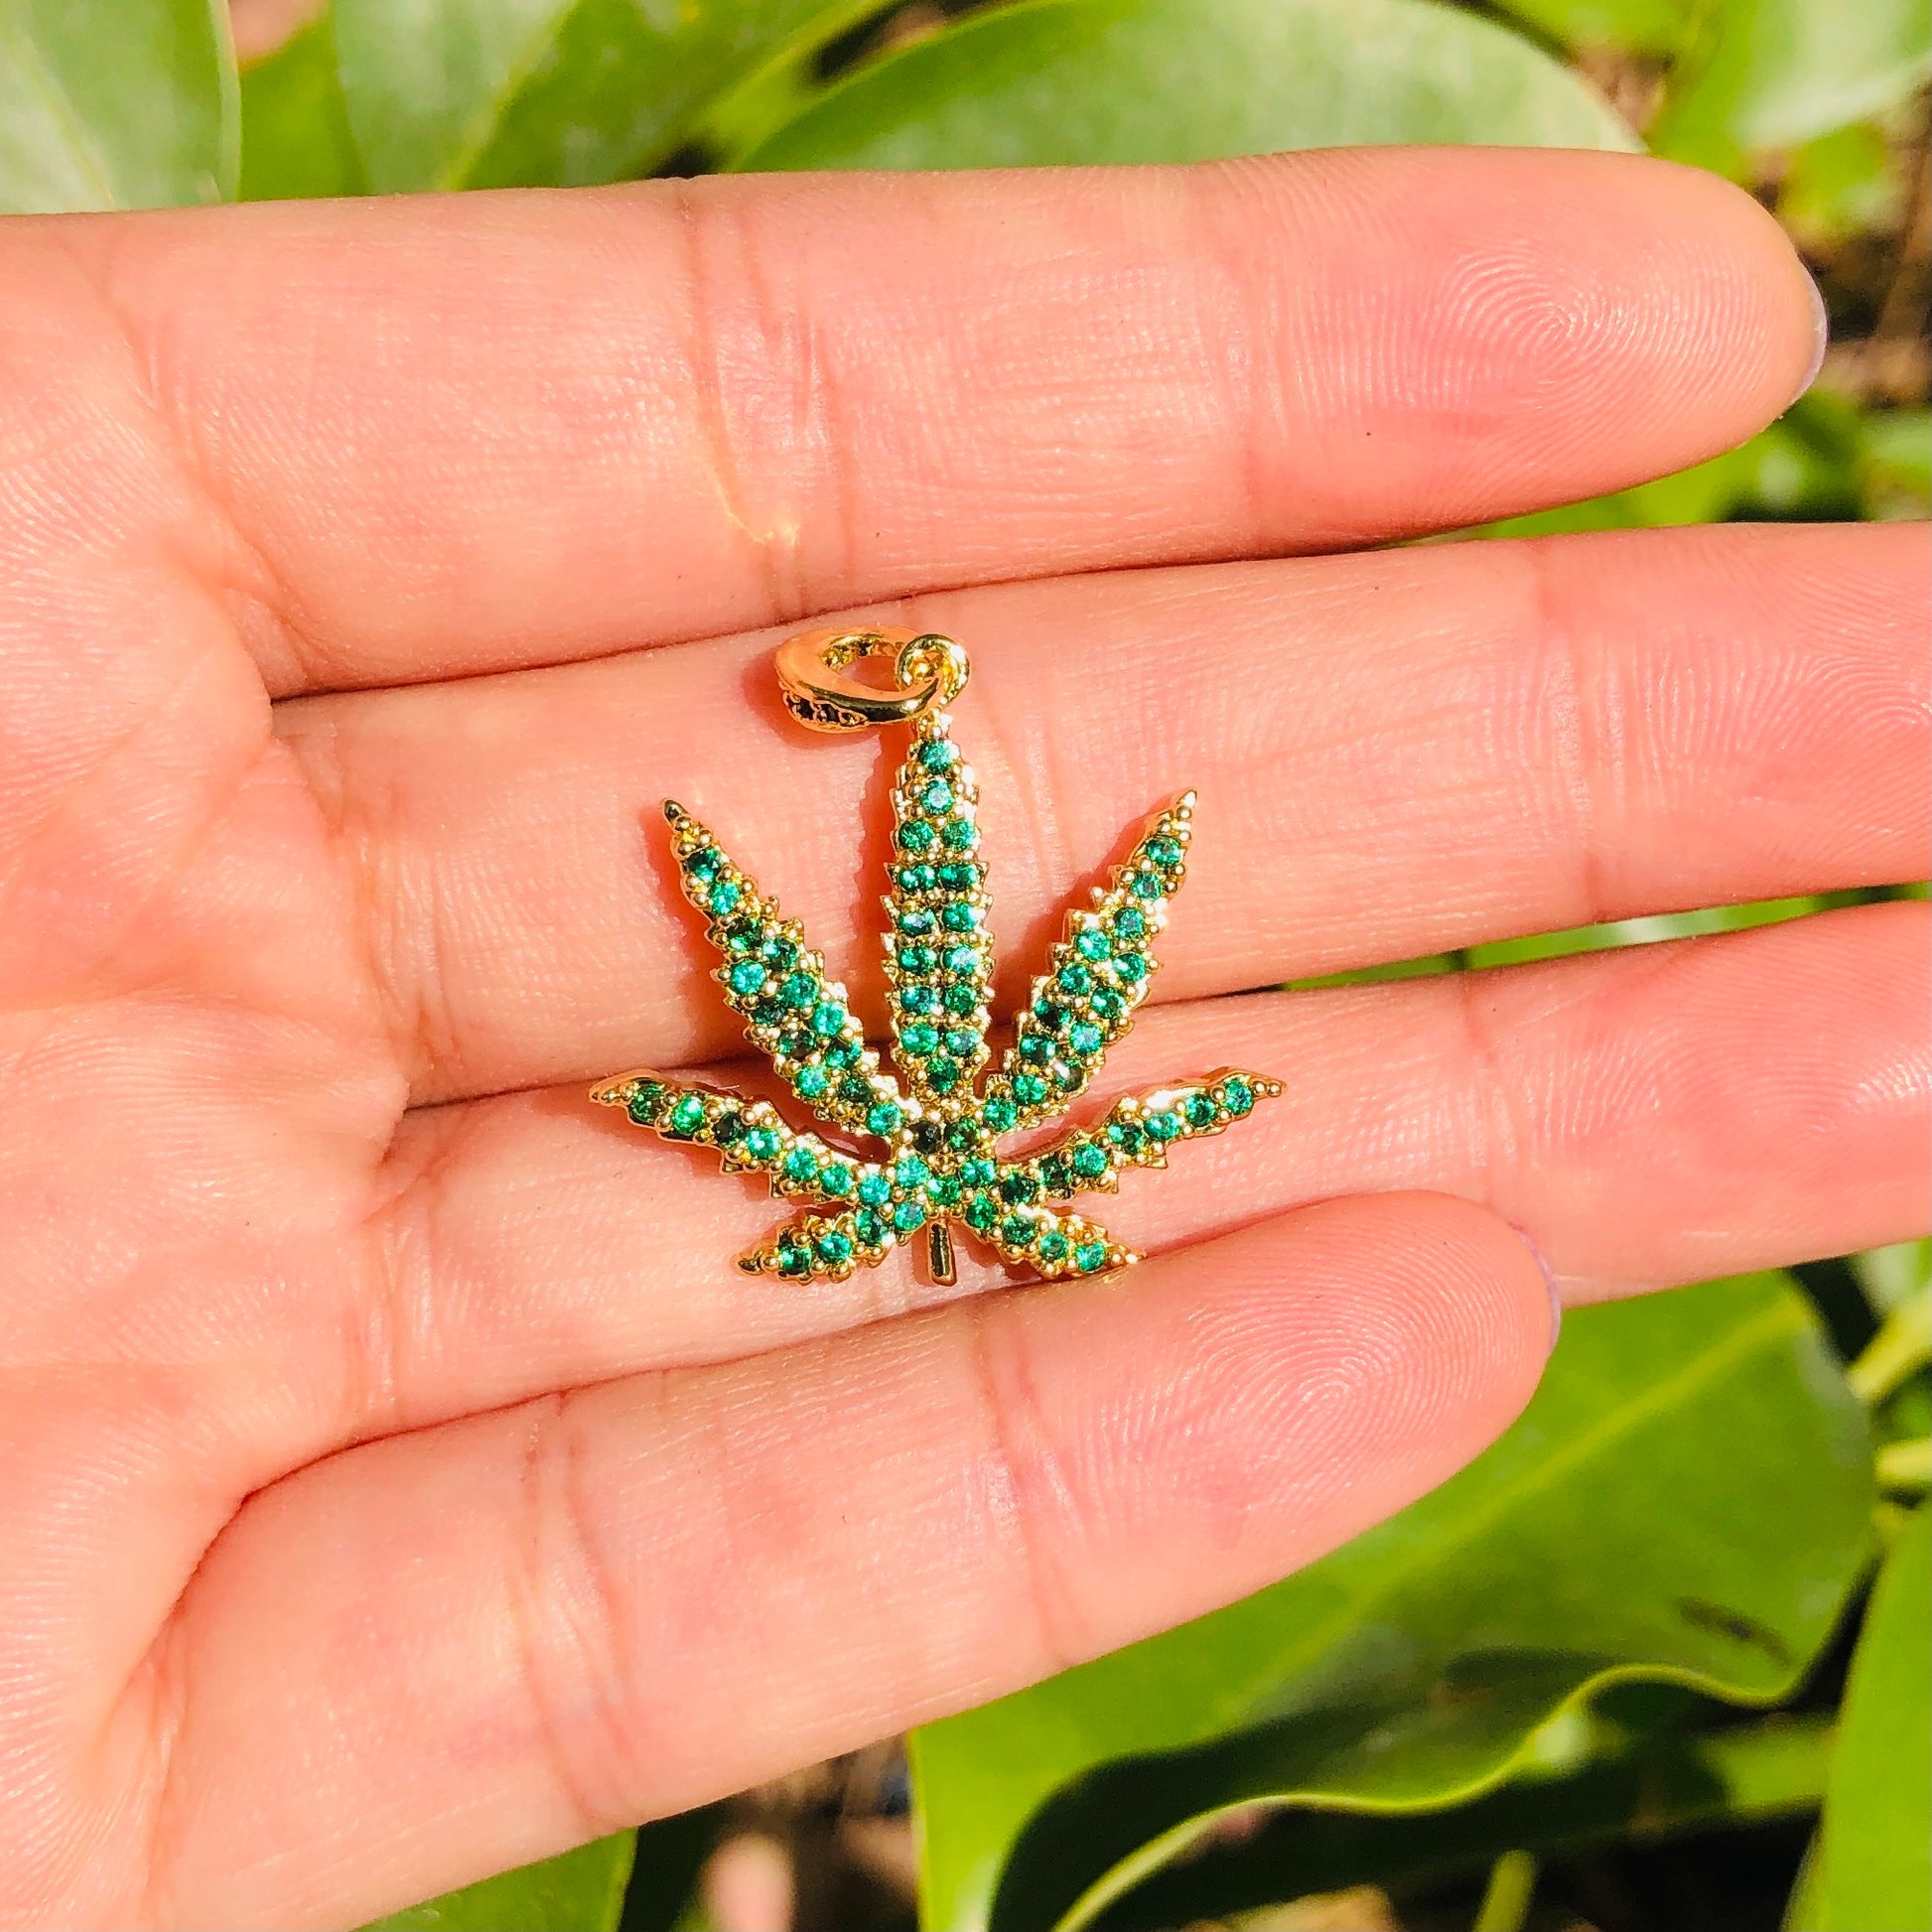 5pcs/lot 25*21.5mm Green CZ Paved Cannabis Leaf Plant Charms CZ Paved Charms Colorful Zirconia Flowers Charms Beads Beyond